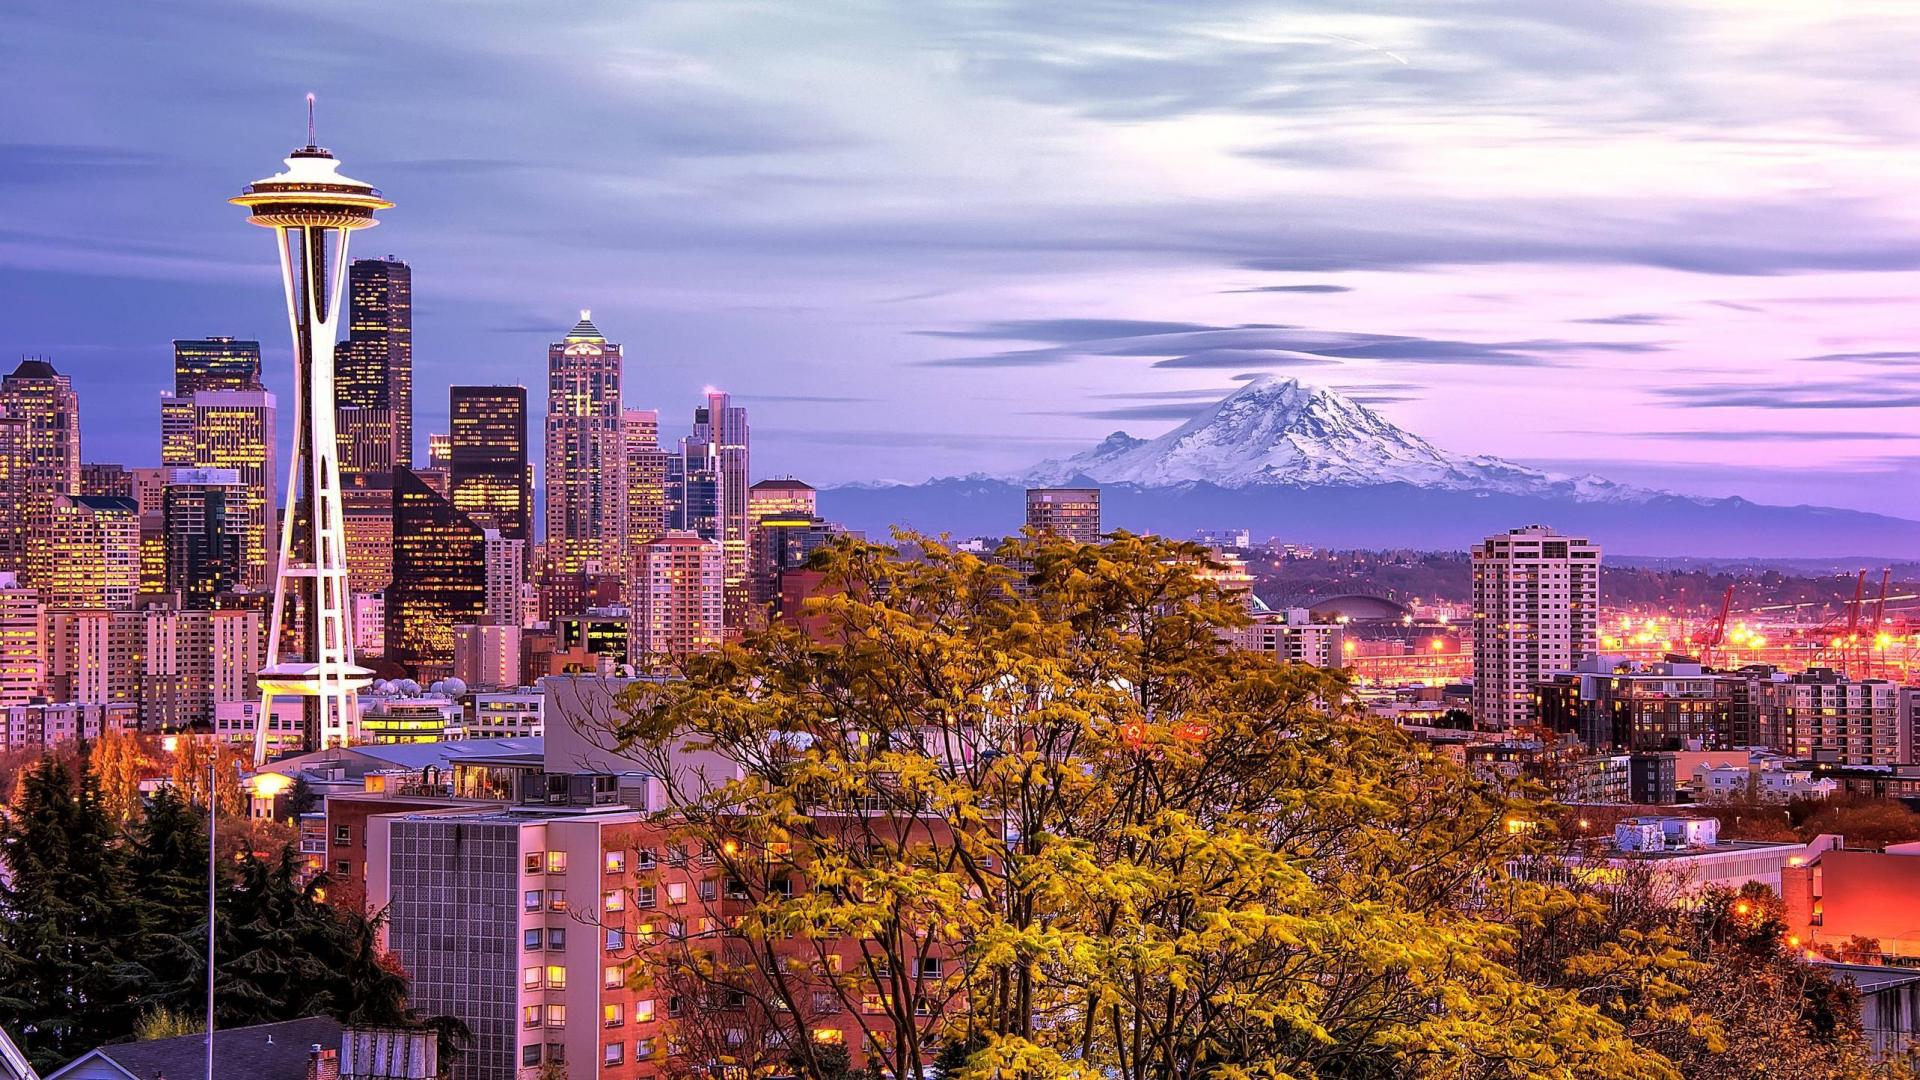 Man Made Seattle City Cityscape Building Mountain Space Needle 1920x1080